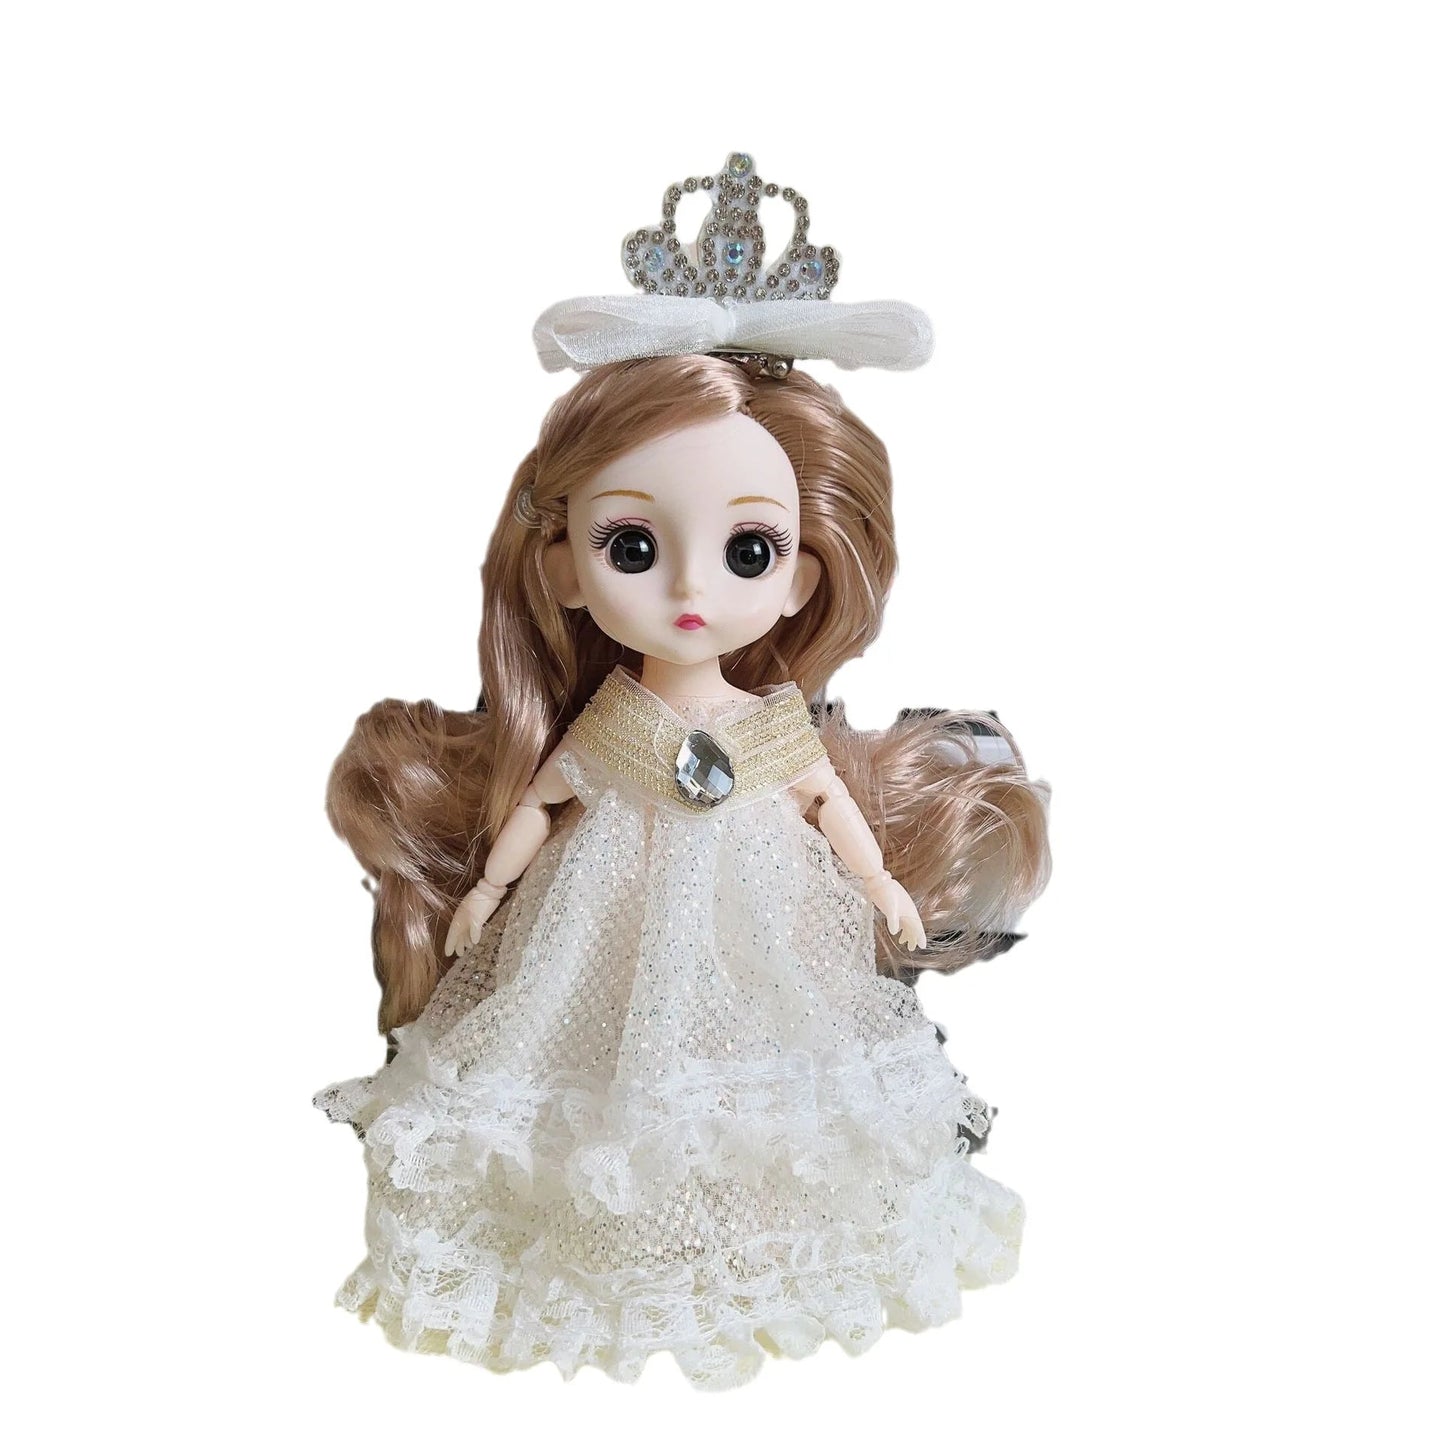 Moveable Joints Princess Doll with 3D Eyes and Convertible Clothing